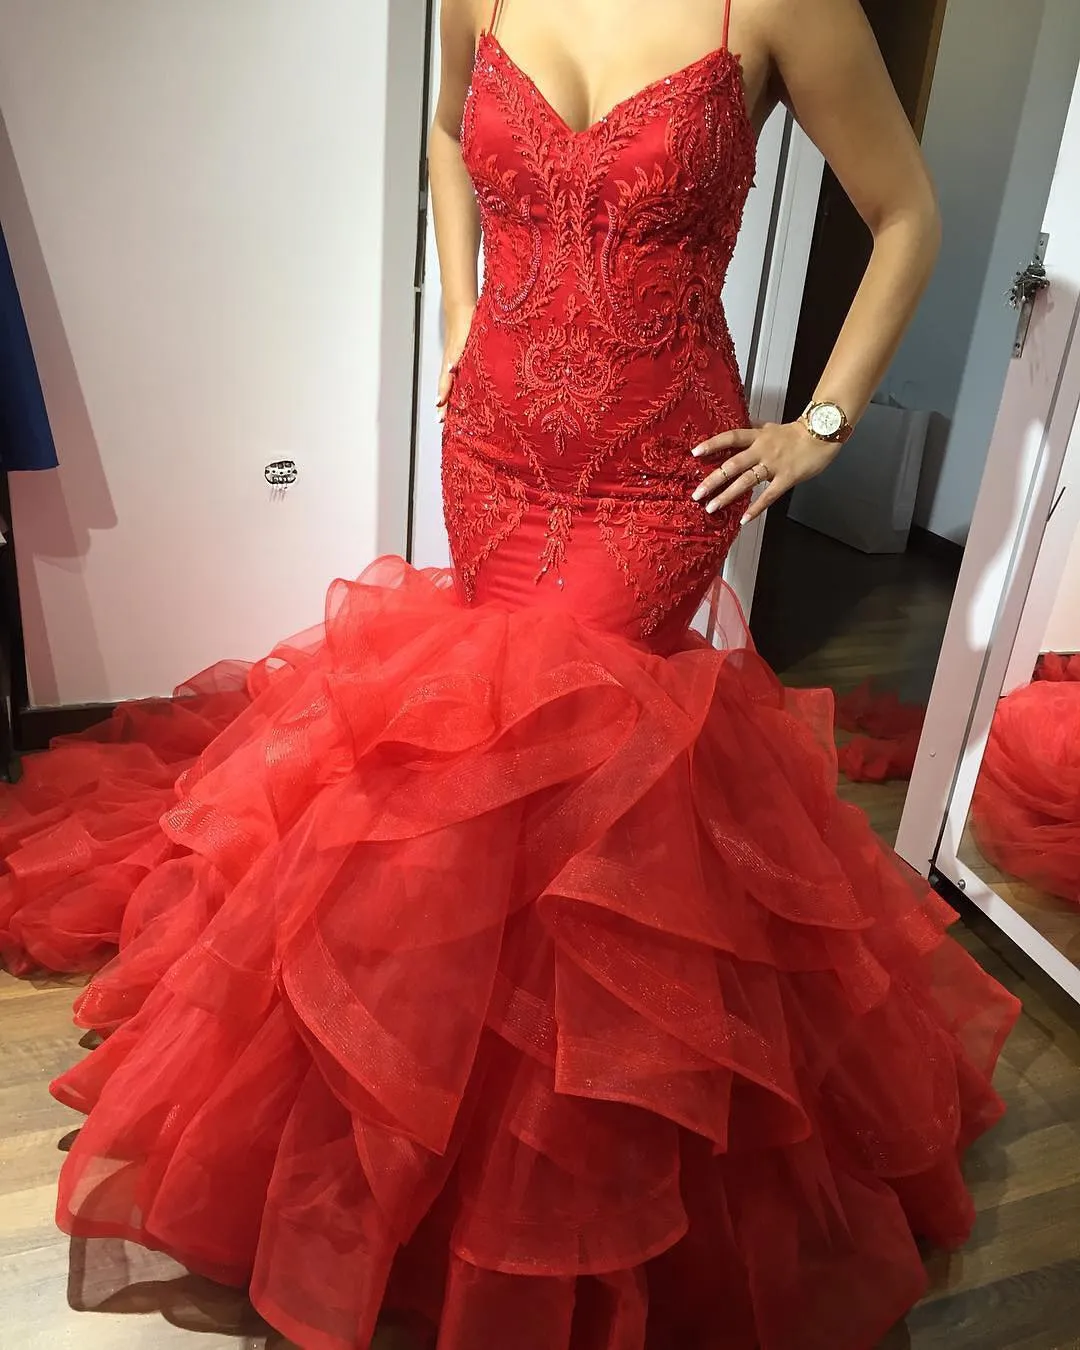 South Africa Red Prom Dresses Spaghetti V-Neck Beaded Appliques Fluffy Tiered Mermaid Prom Dress Glamorous Sexy Party Gown Evening Dresses